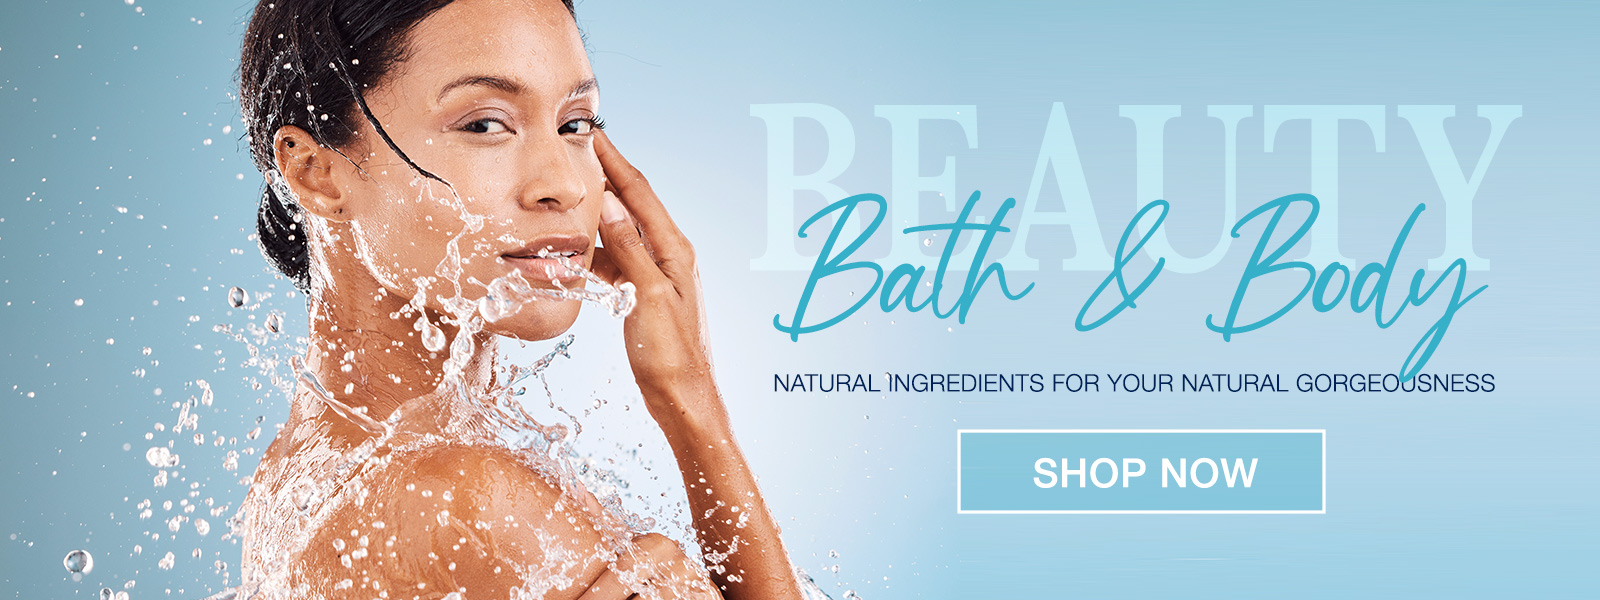 Natural body and beauty care - Shop Now